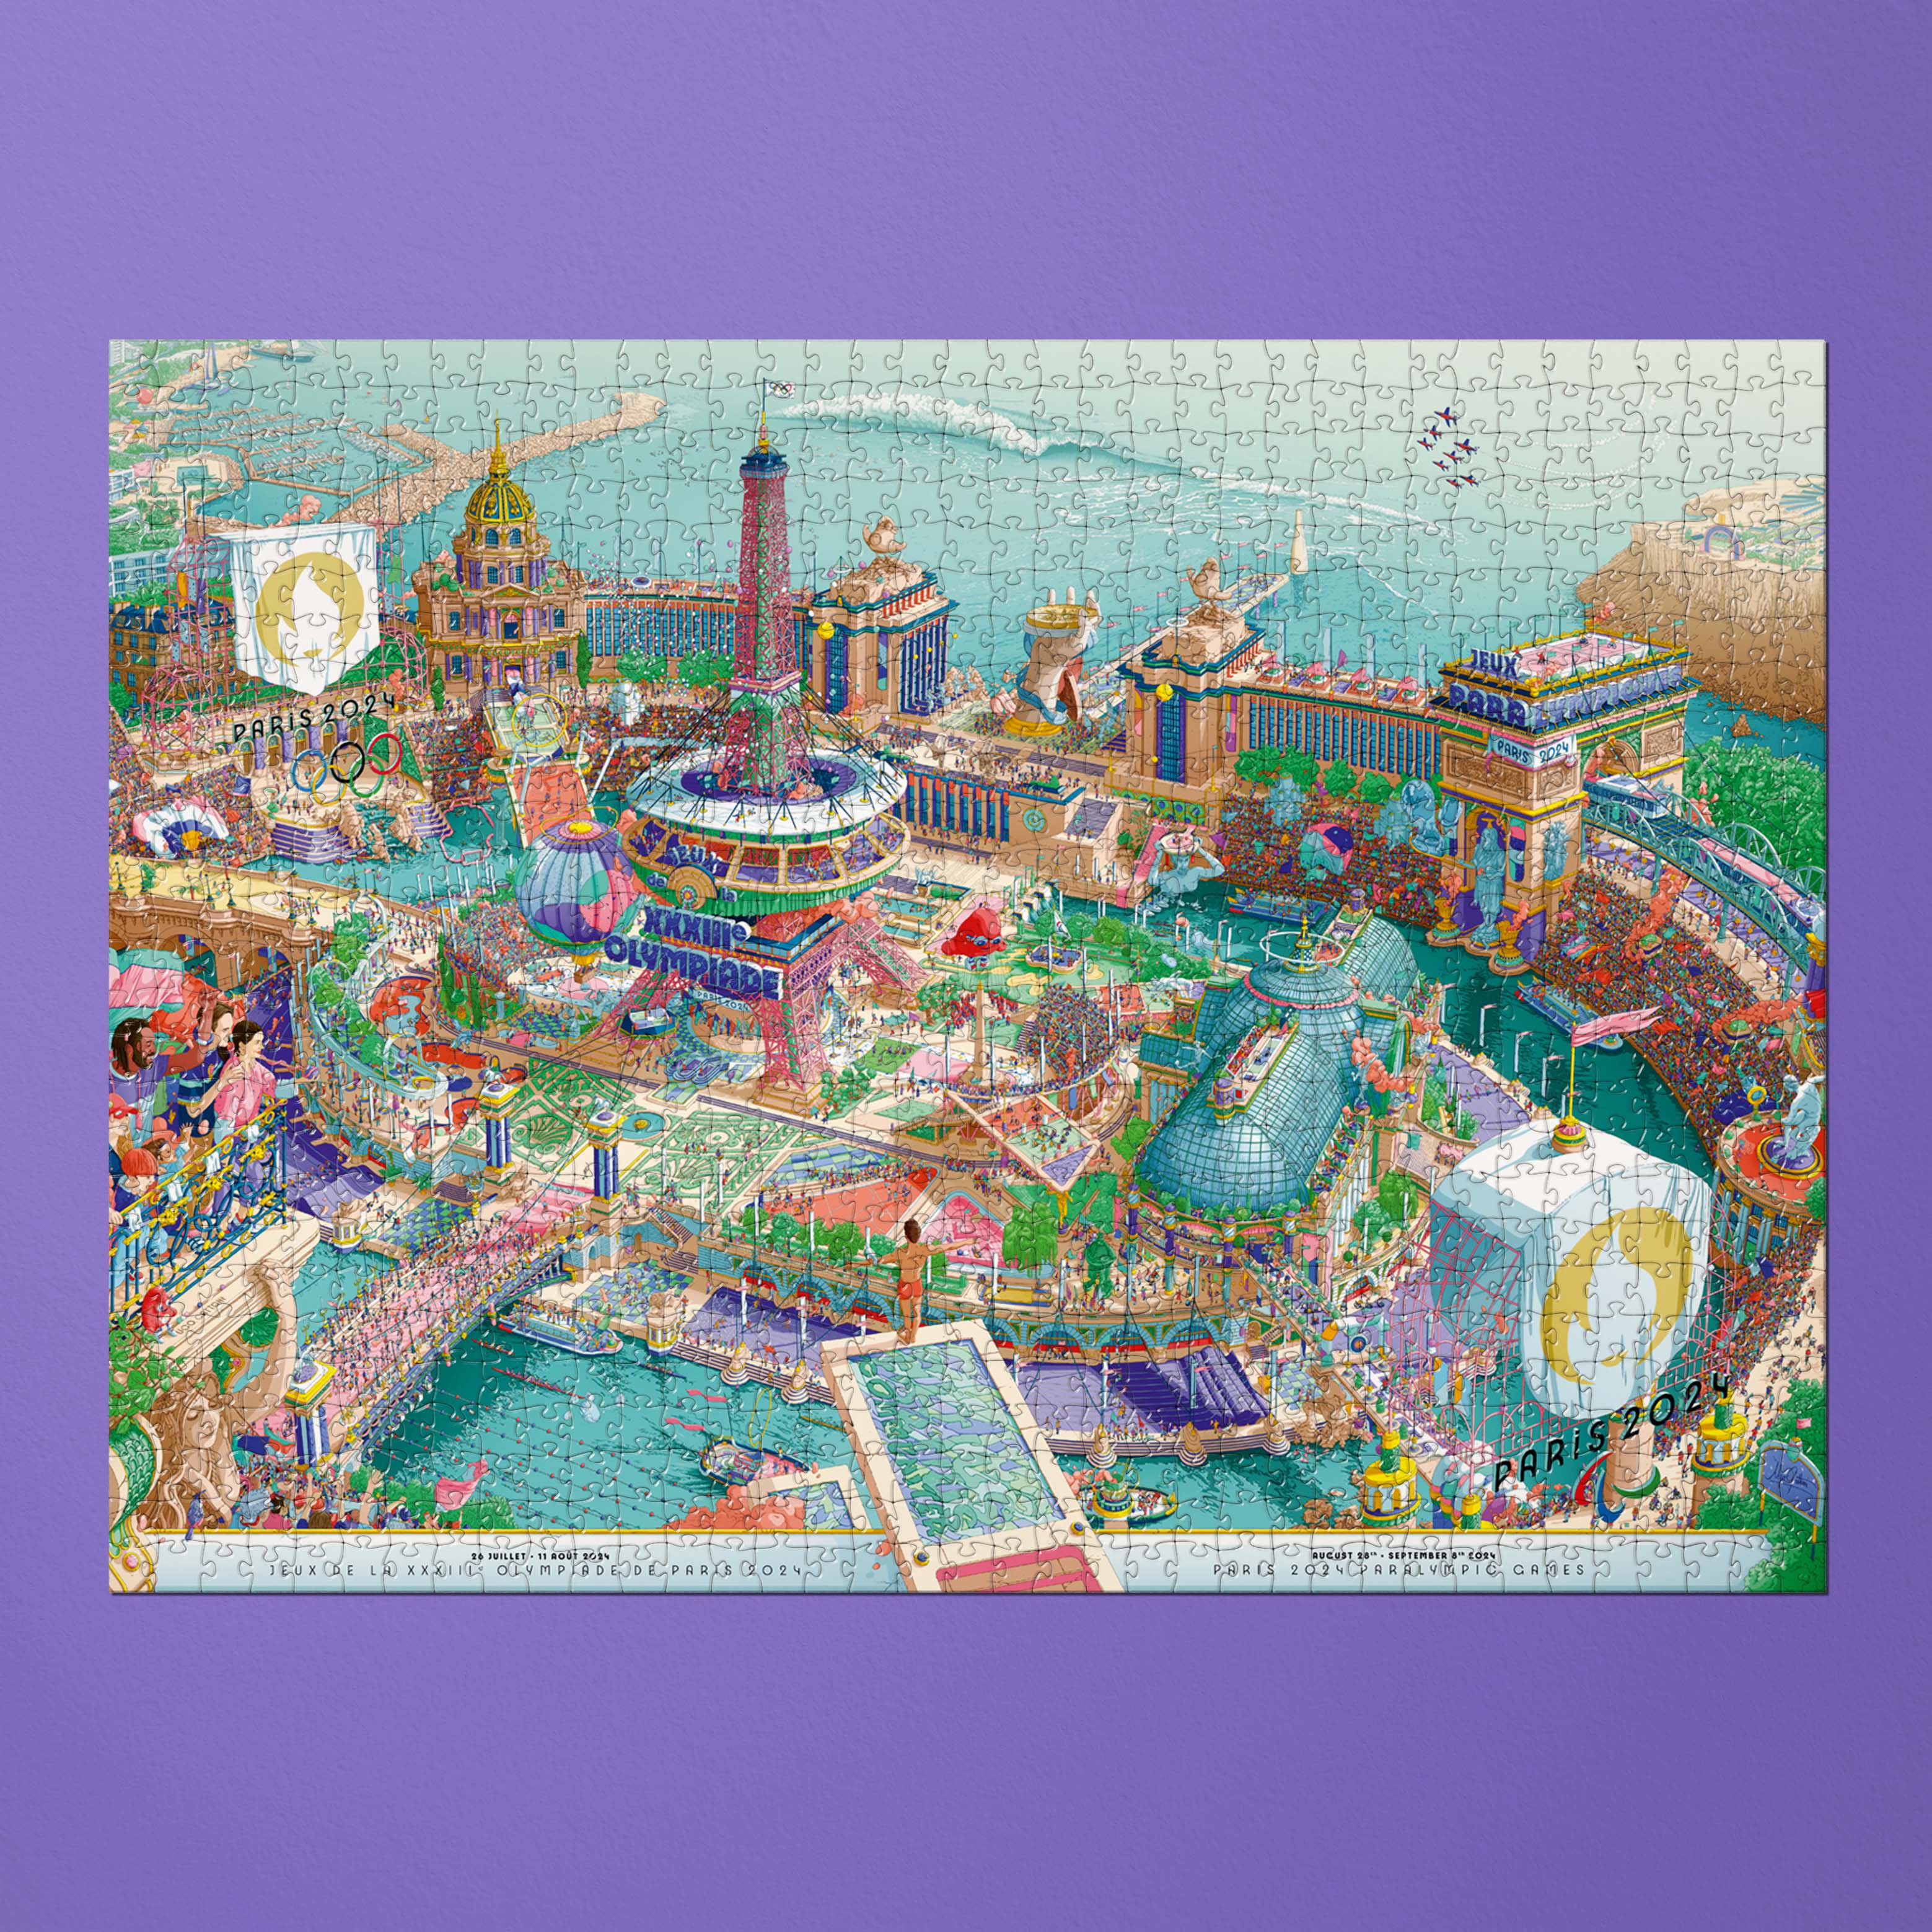 Puzzle of the official posters of the Paris 2024 Olympic and Paralympic Games